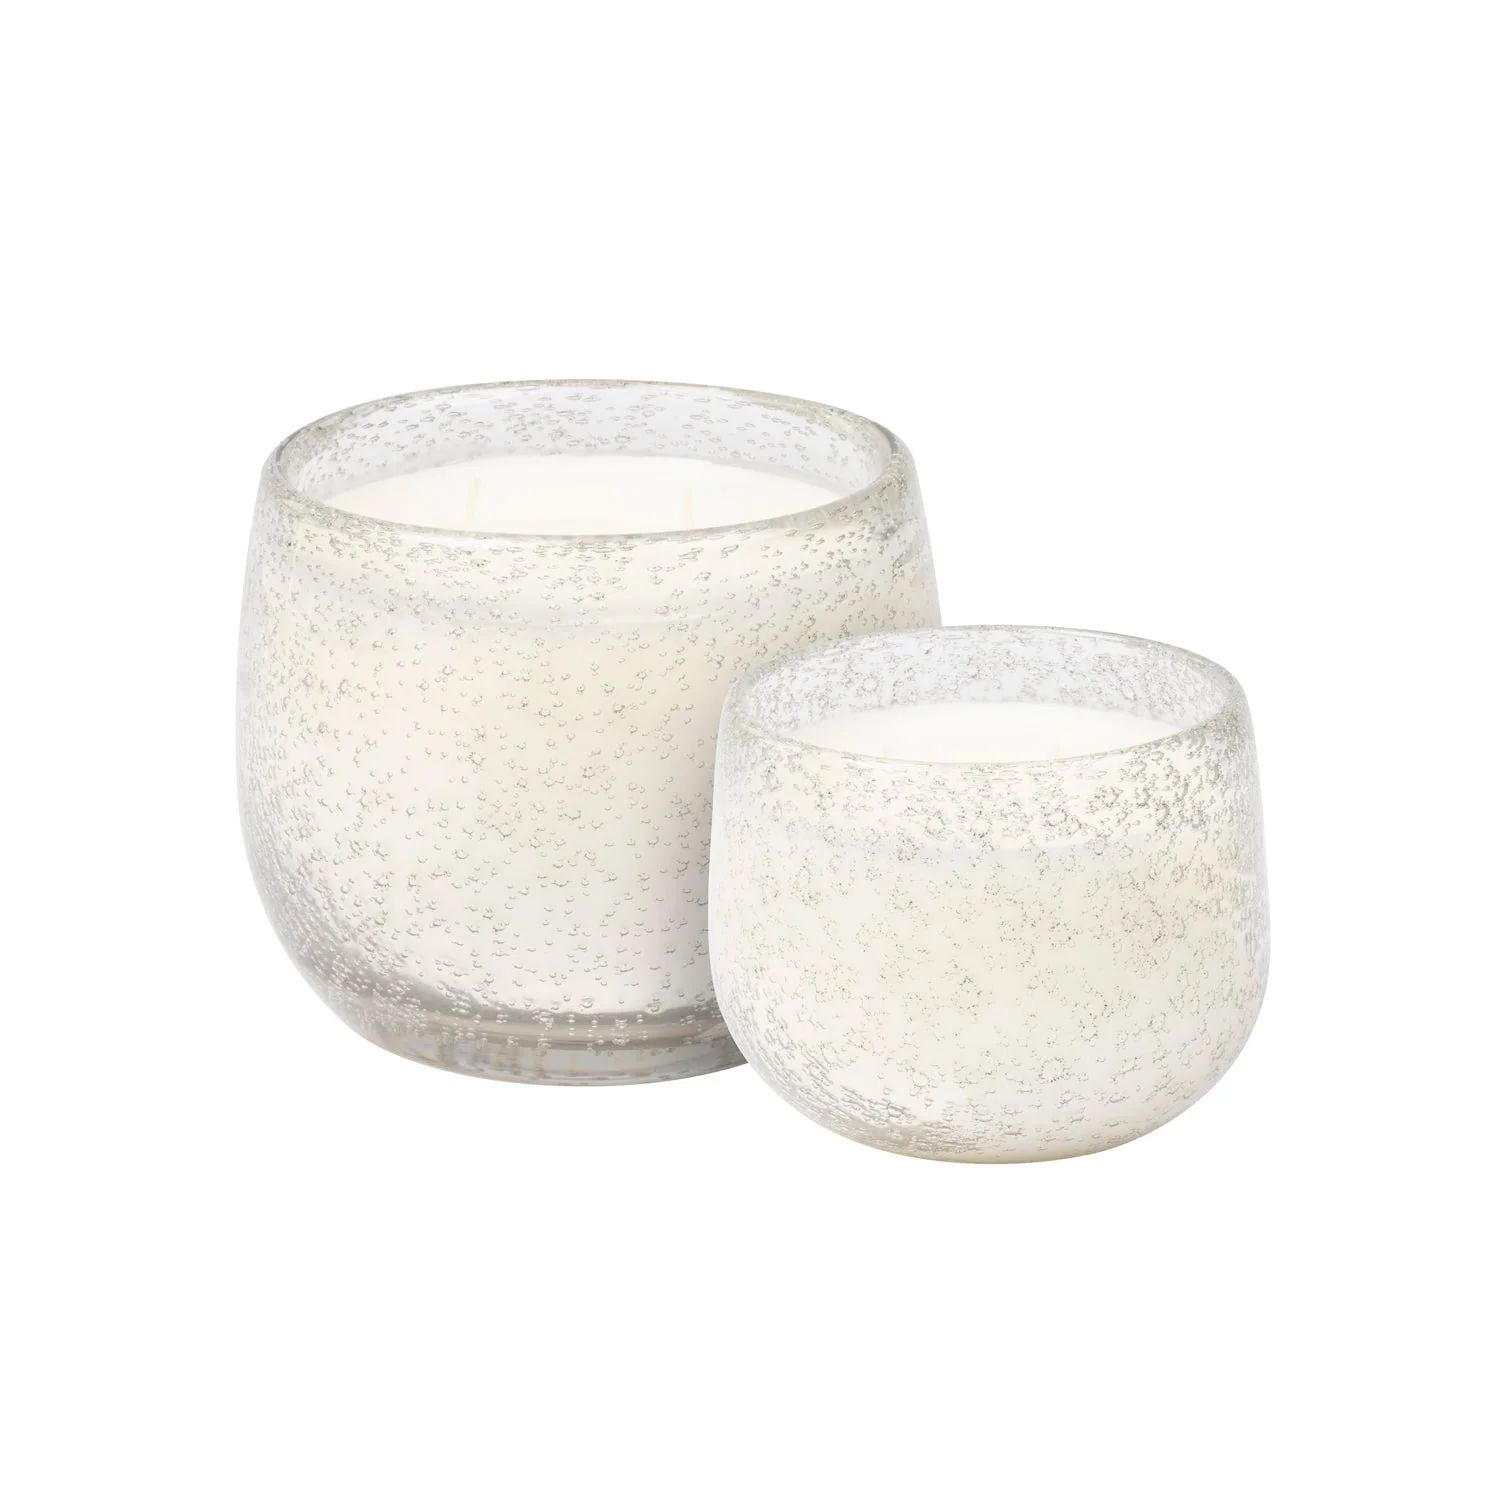 Luxury Coconut Wax Candle | Mouth Blown Glass - Rice Flower+Wood | La Lueur Candles